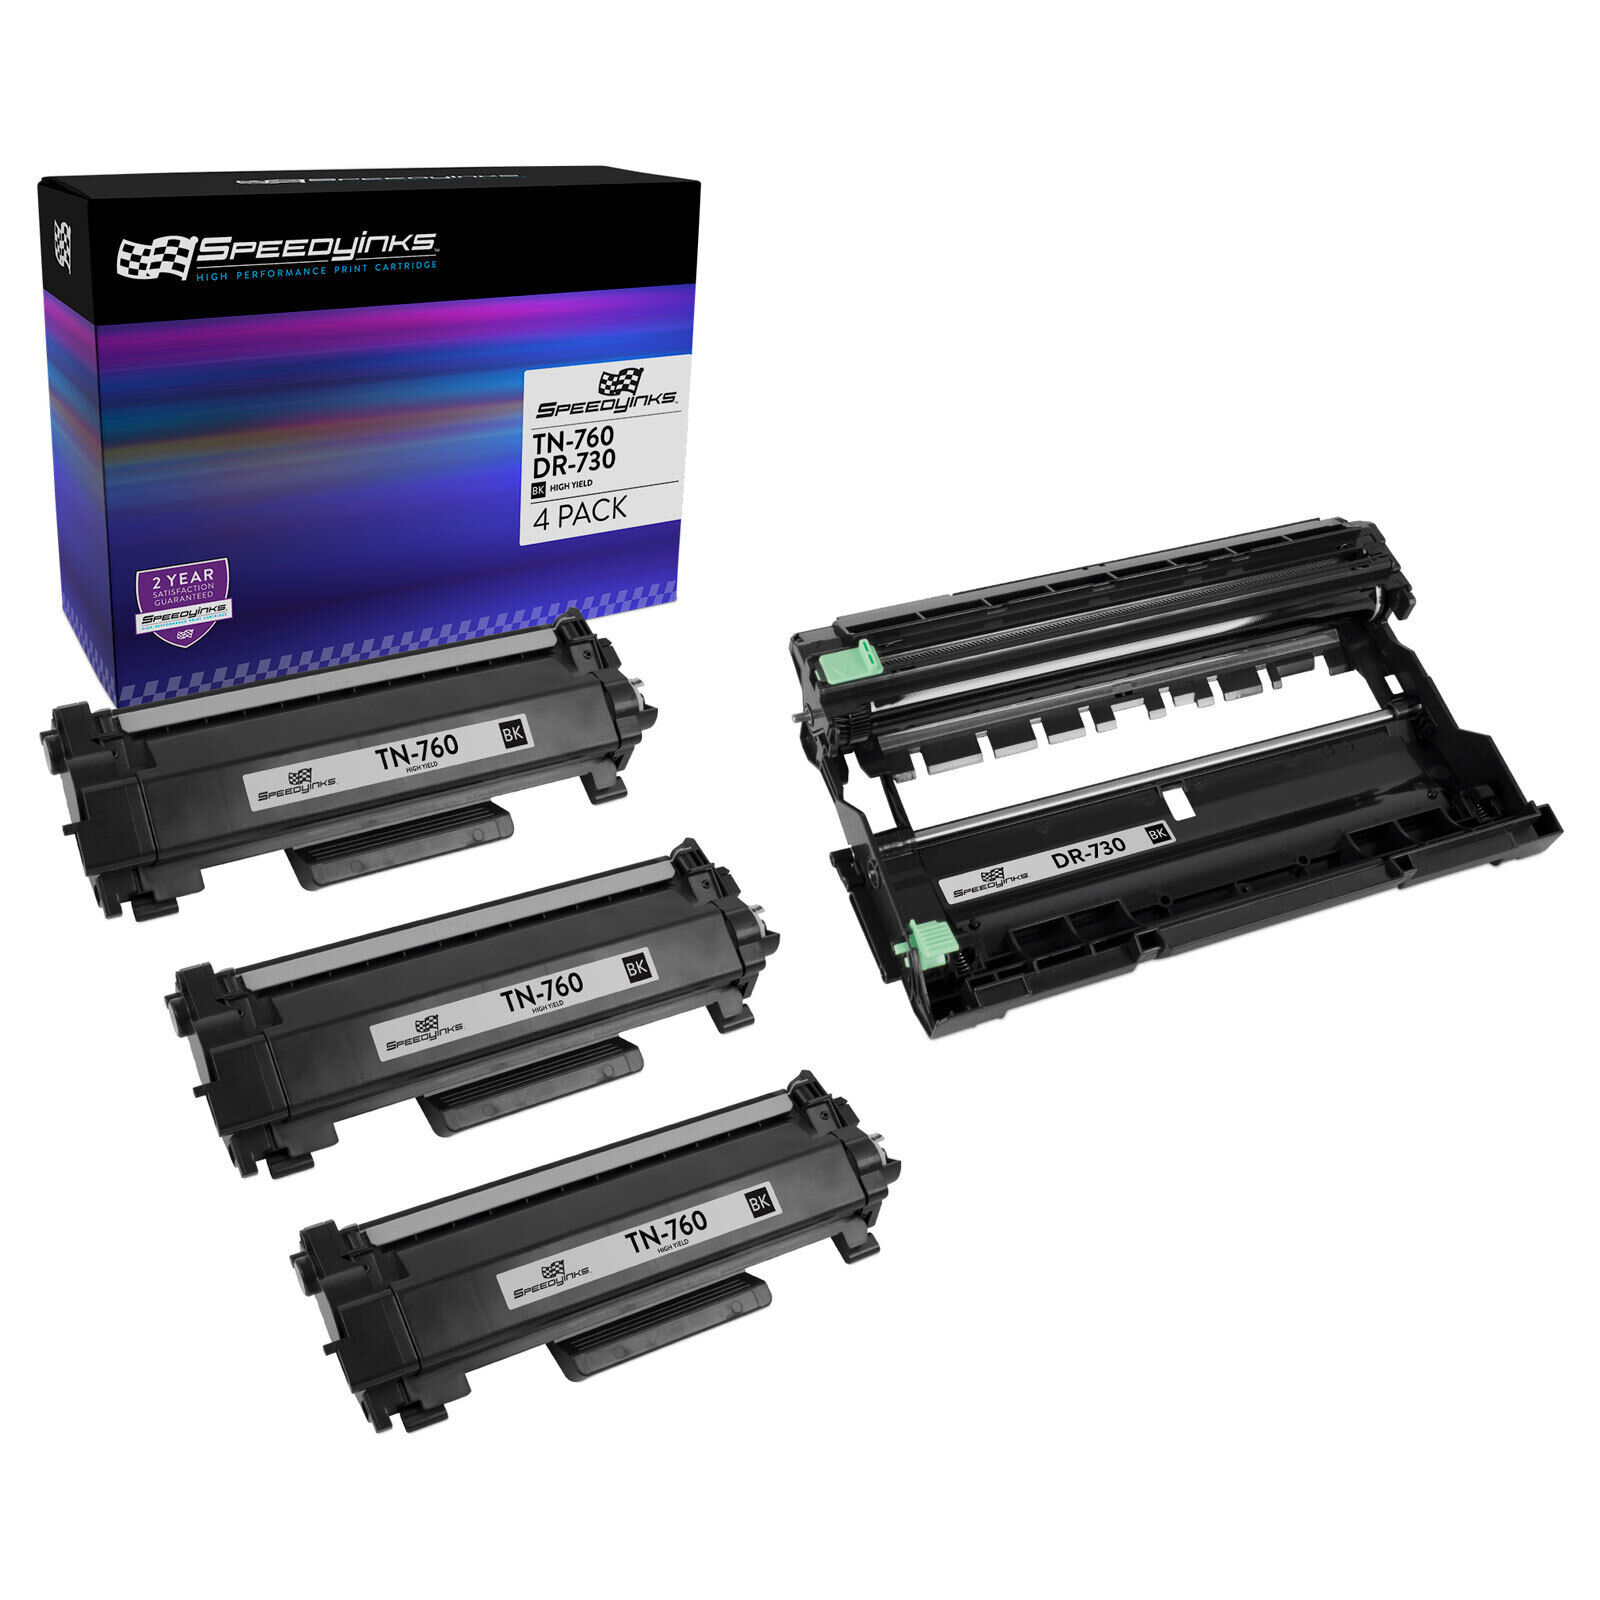 SPEEDYINKS 4PK Replacements for Brother TN760 Black Toner Cartridge & DR730 Drum